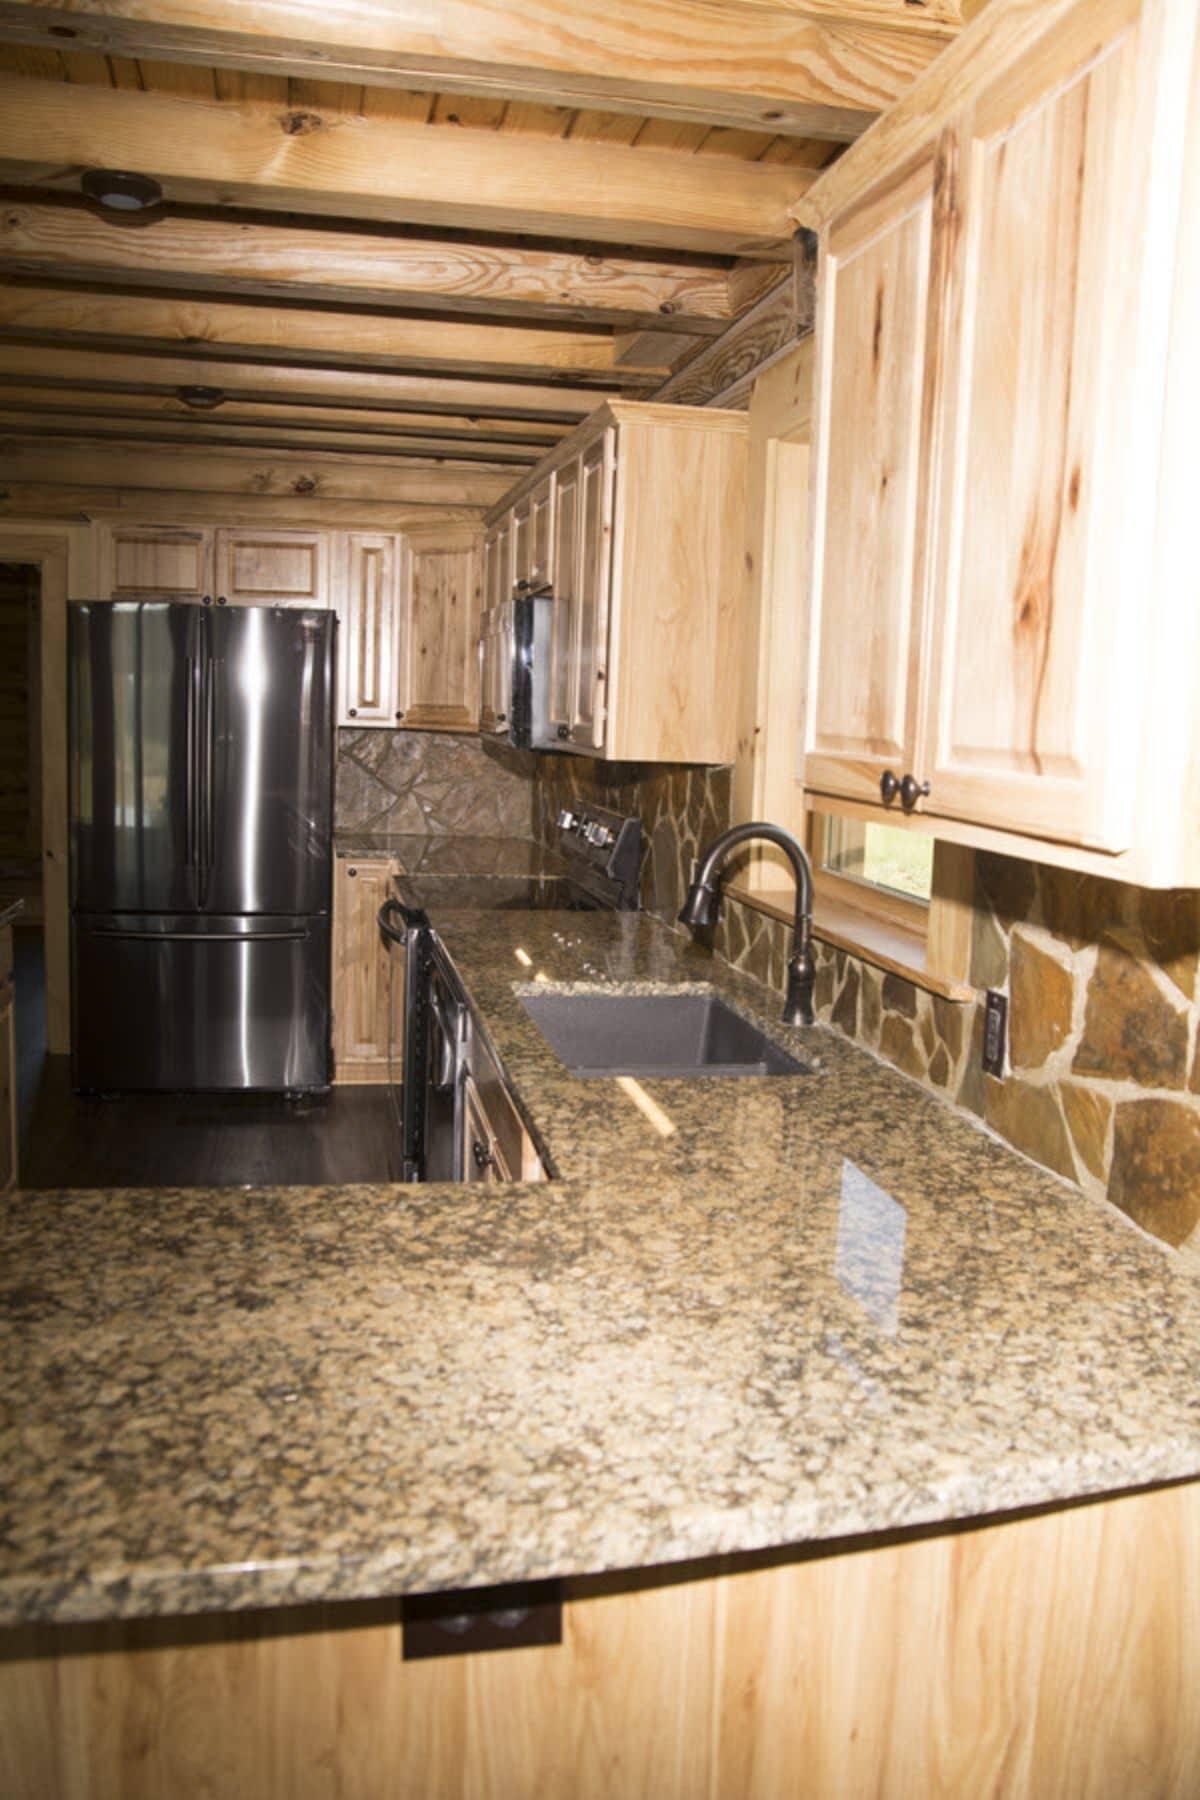 kitchen counters below light wood cabinets with stainless steel refrigerator in background